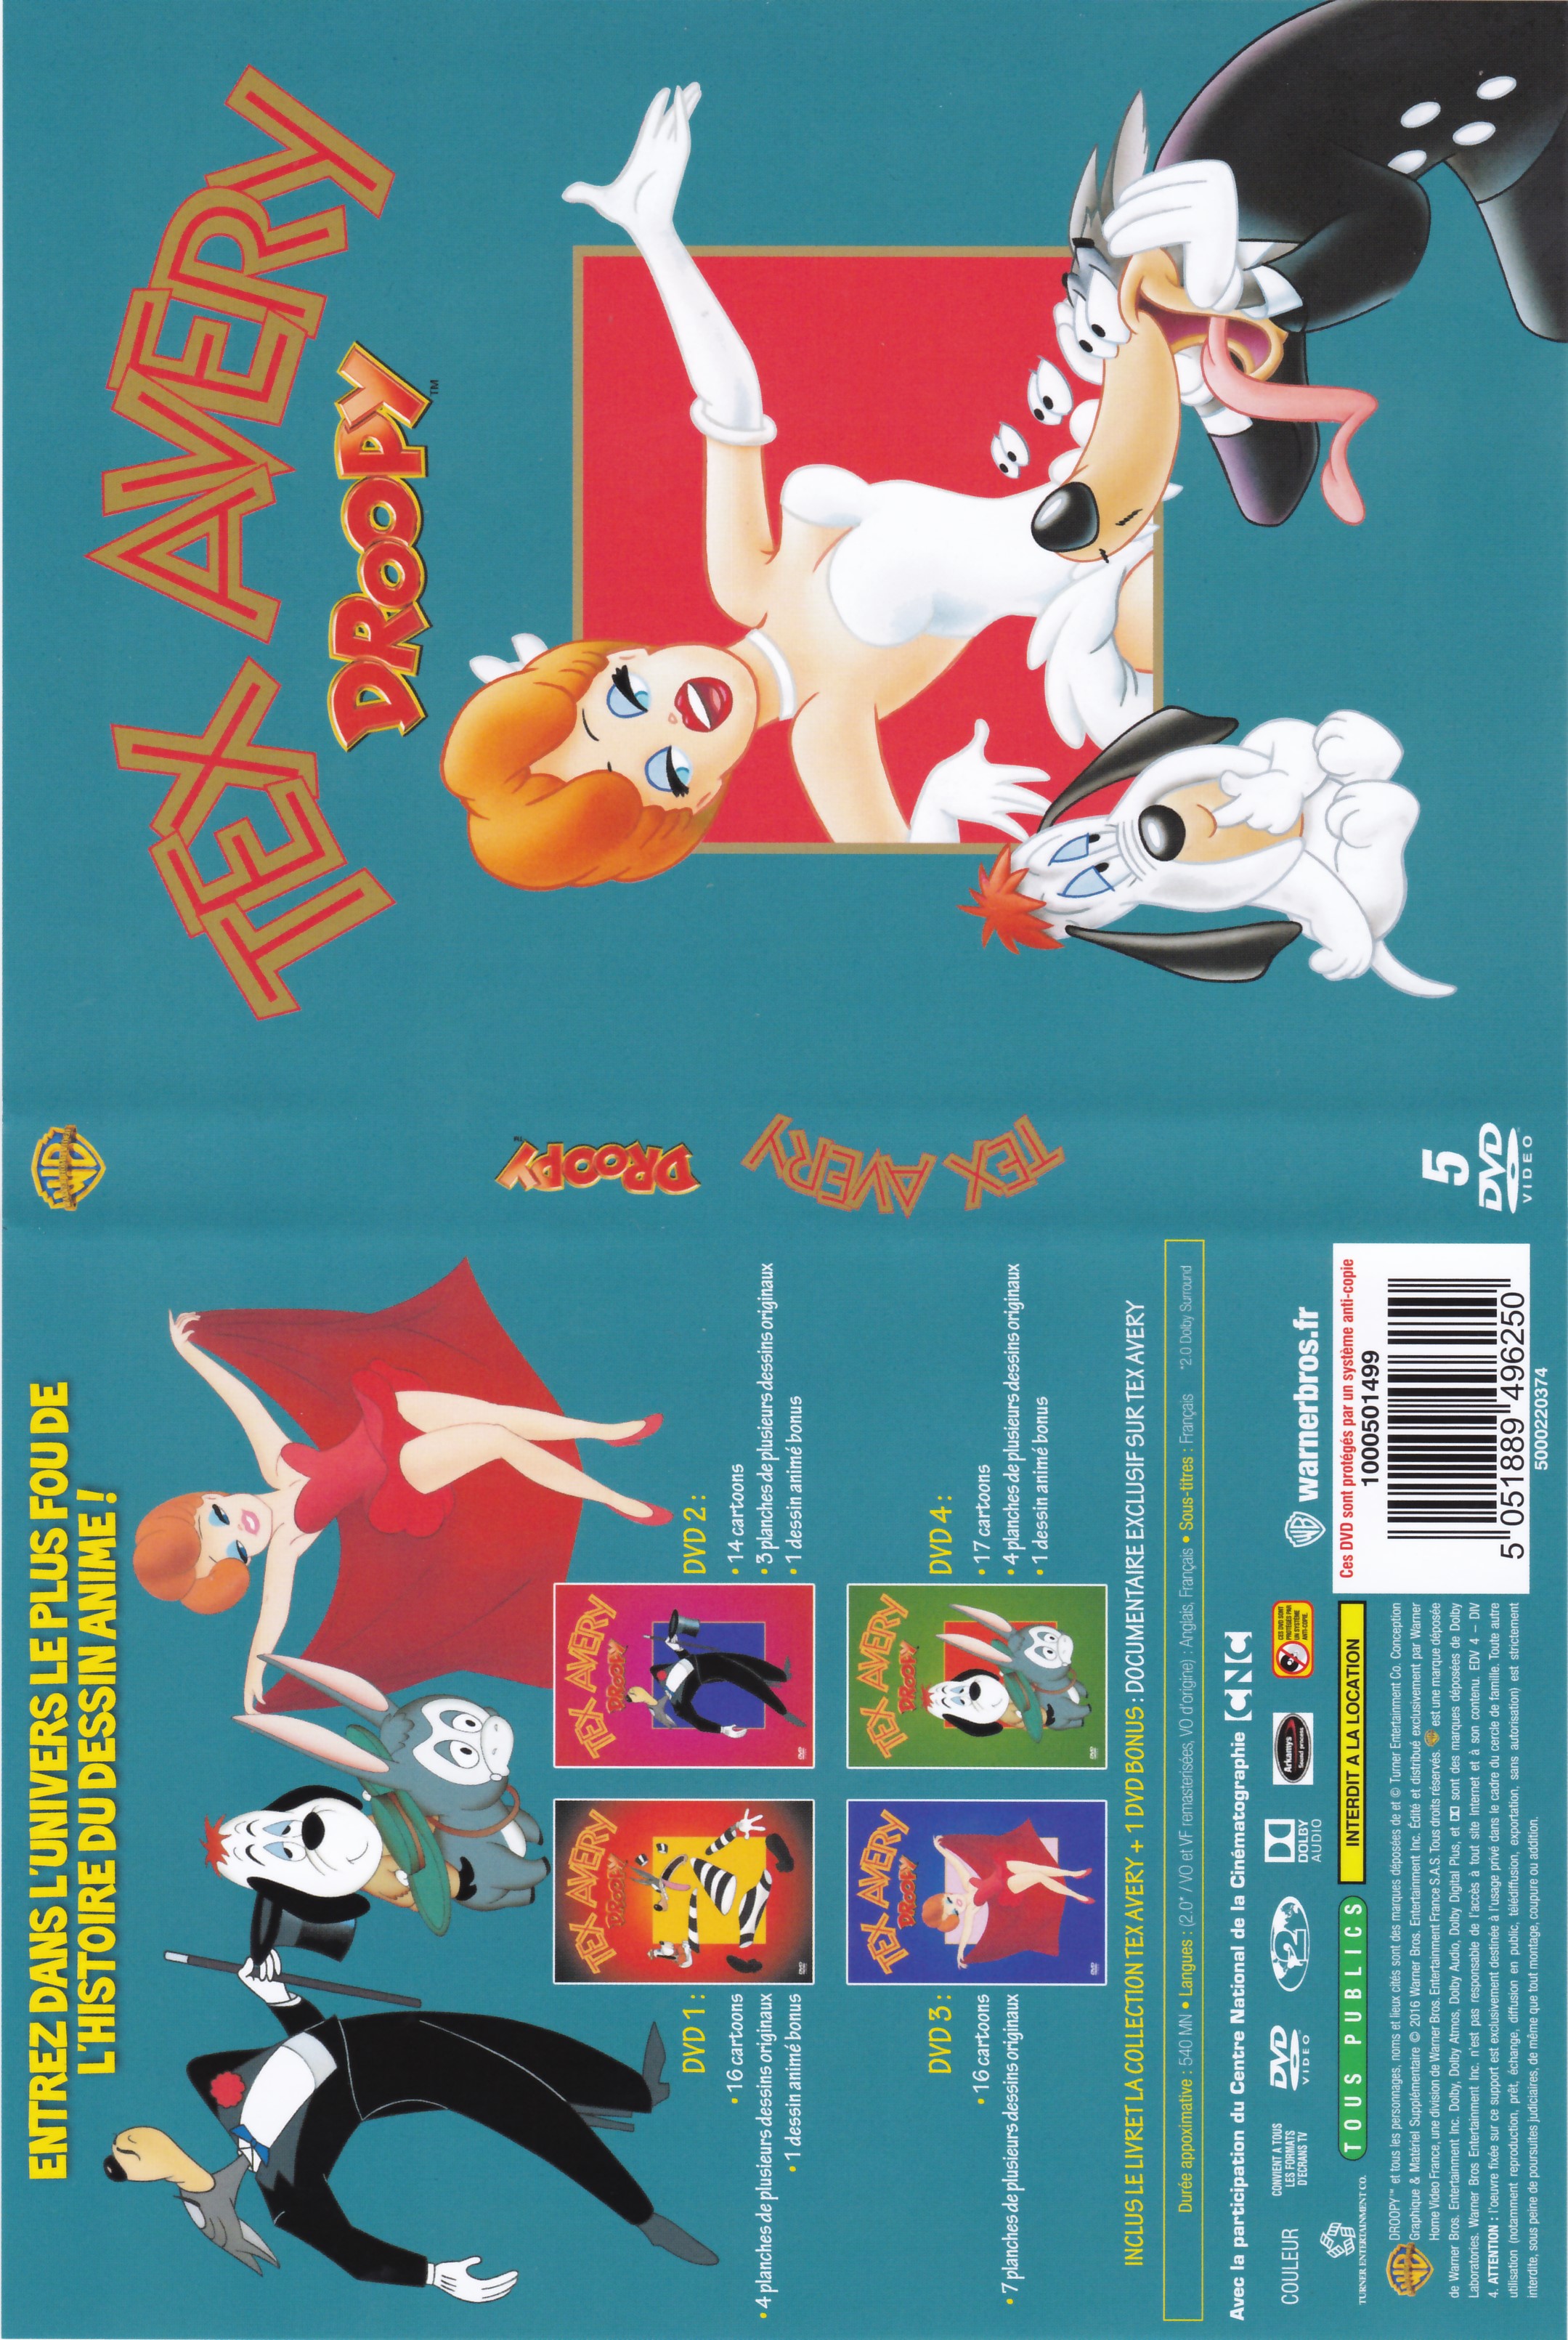 Jaquette DVD Tex Avery (Jaquette Amaray 5 DVD)